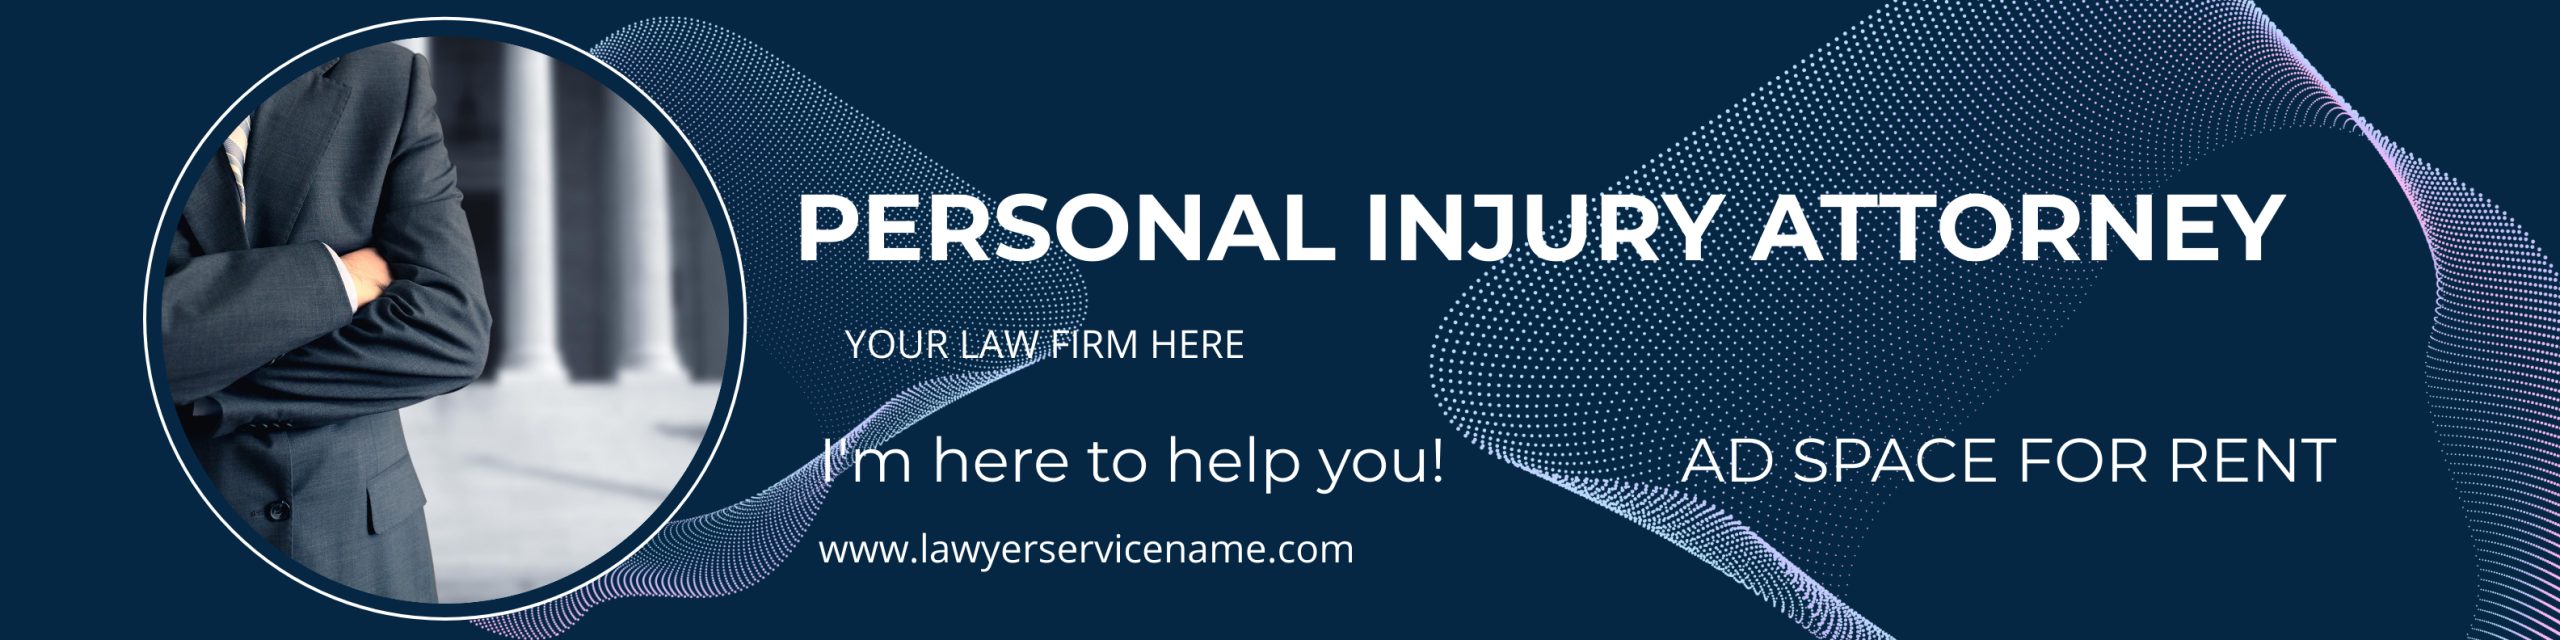 Personal Injury Attorney Ad Banner For Rent